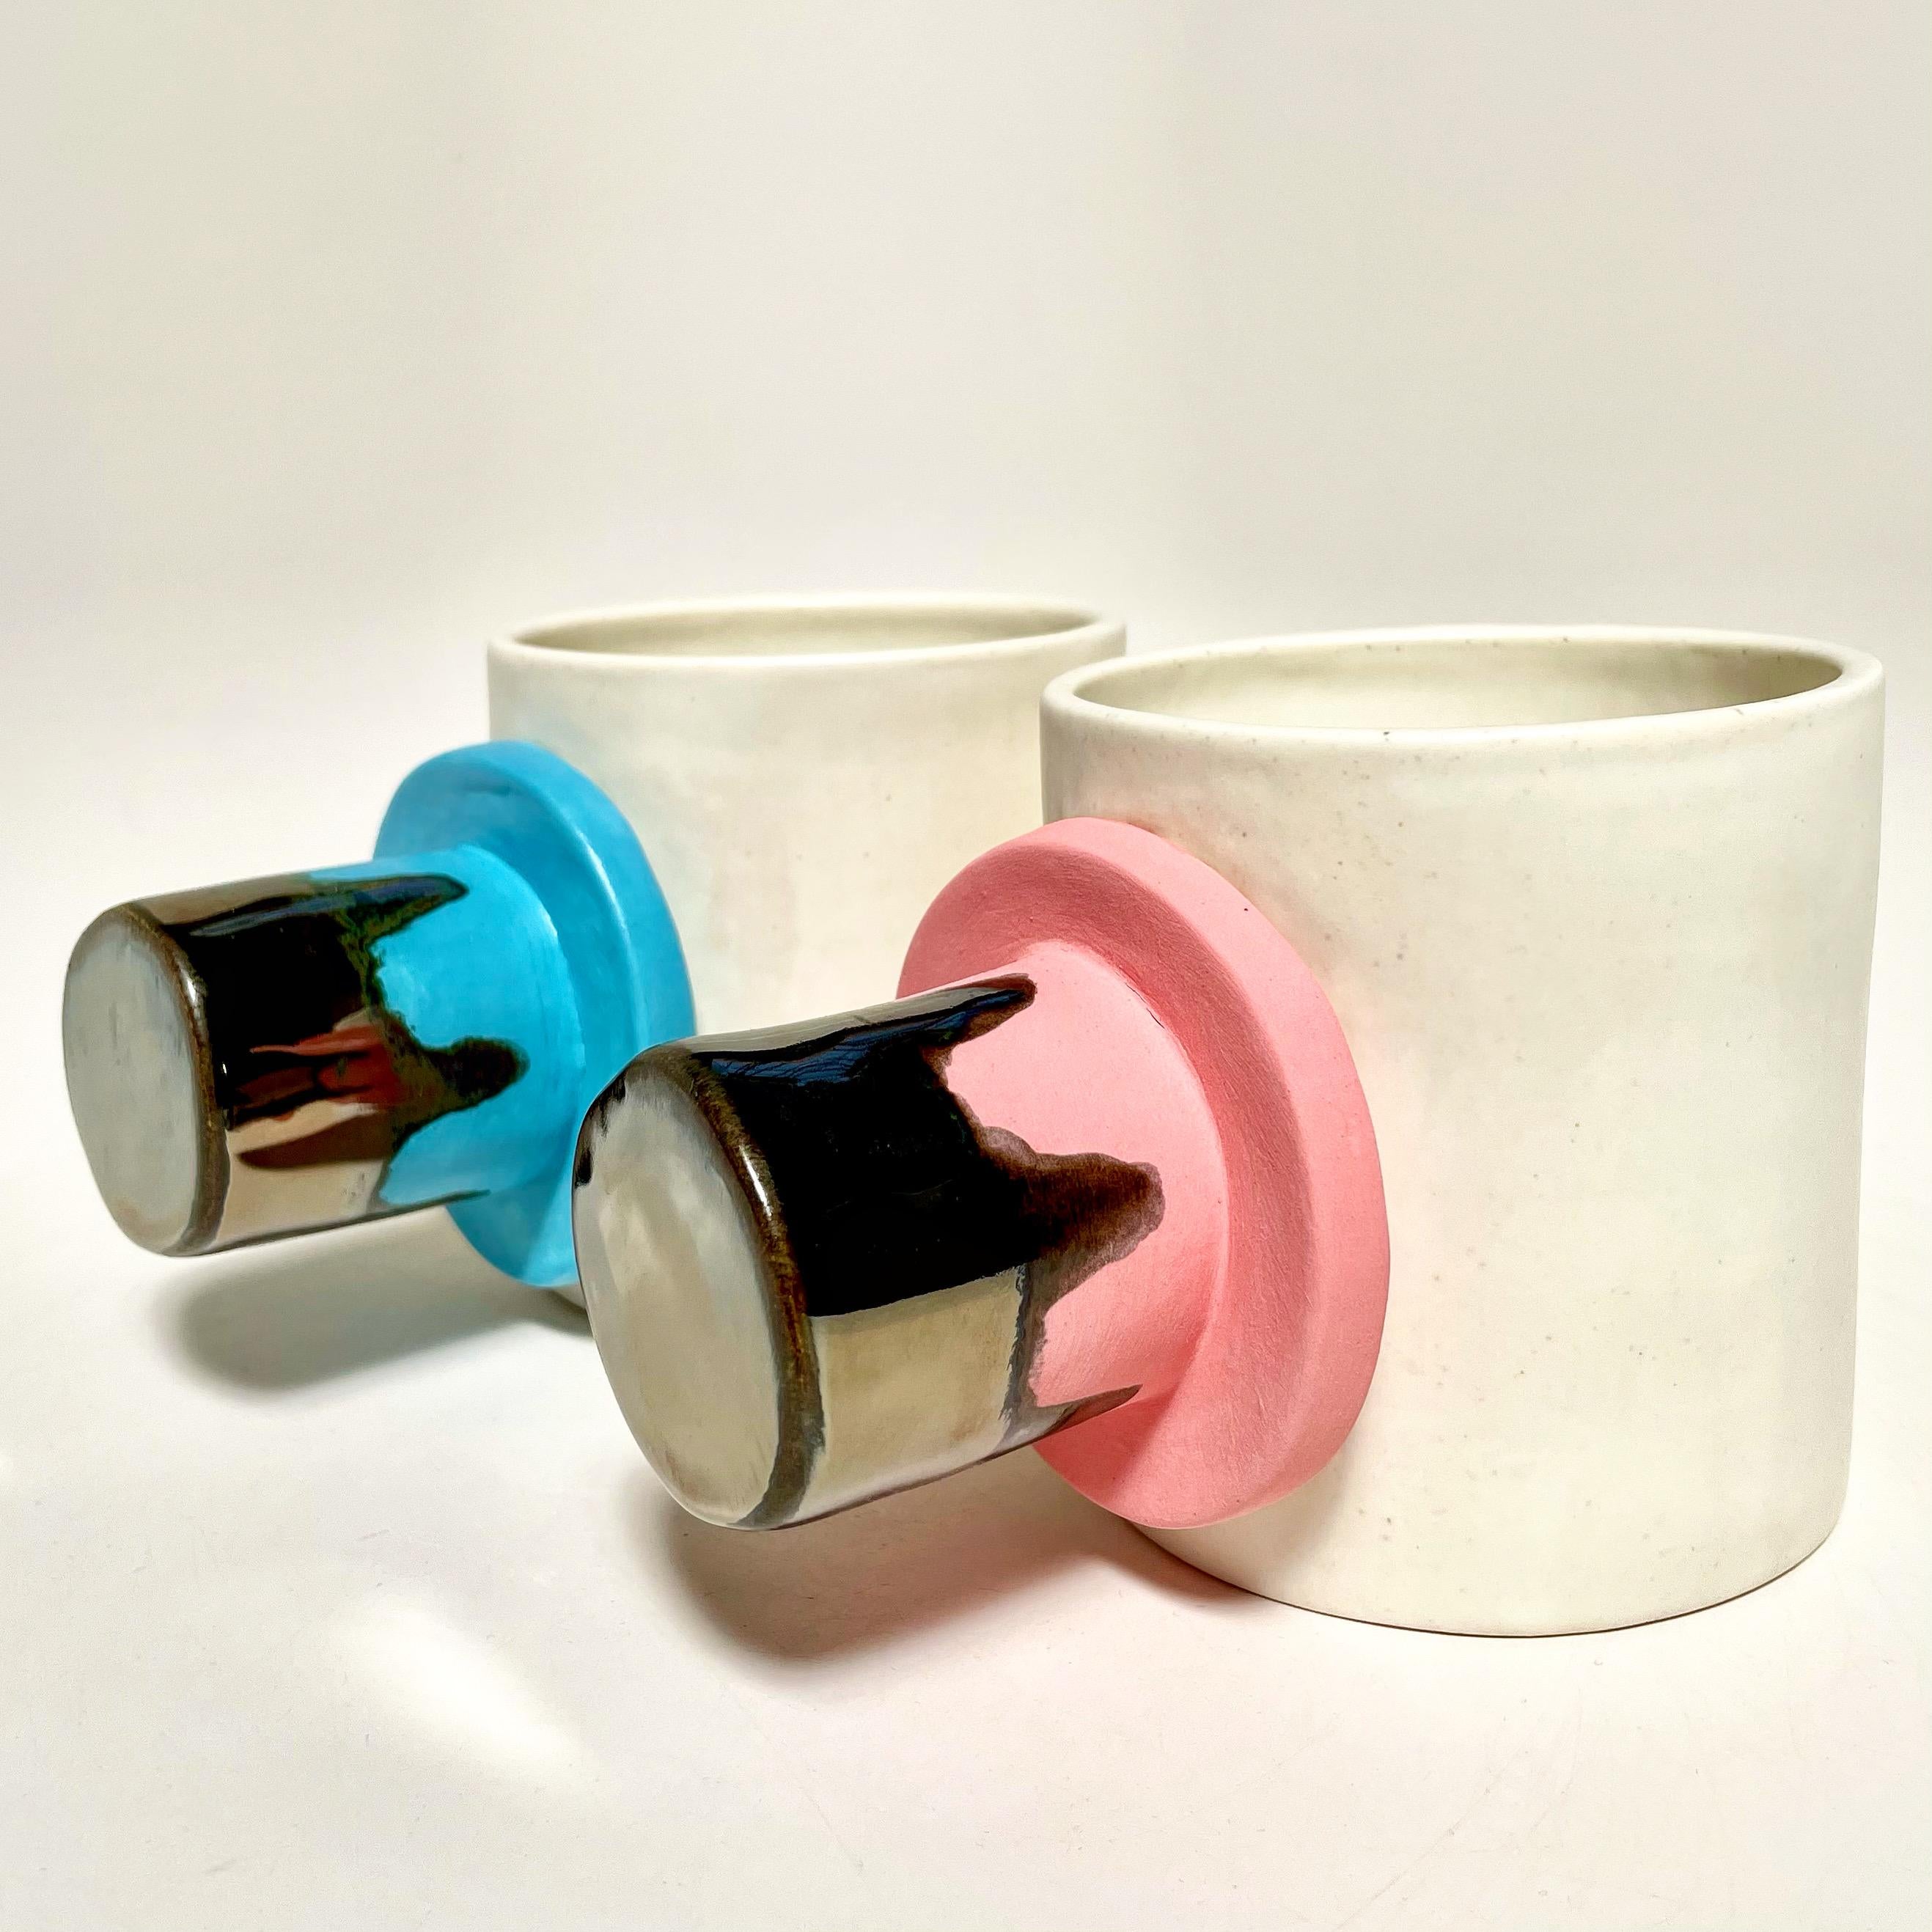 The BIB mixed handle espresso set of four, shown in turquoise and matte pink with degrade silver handles, the ideal set for your cappuccino or espresso. Perfect for entertaining, or as a set of decorative objects or object d'art. Versatile,